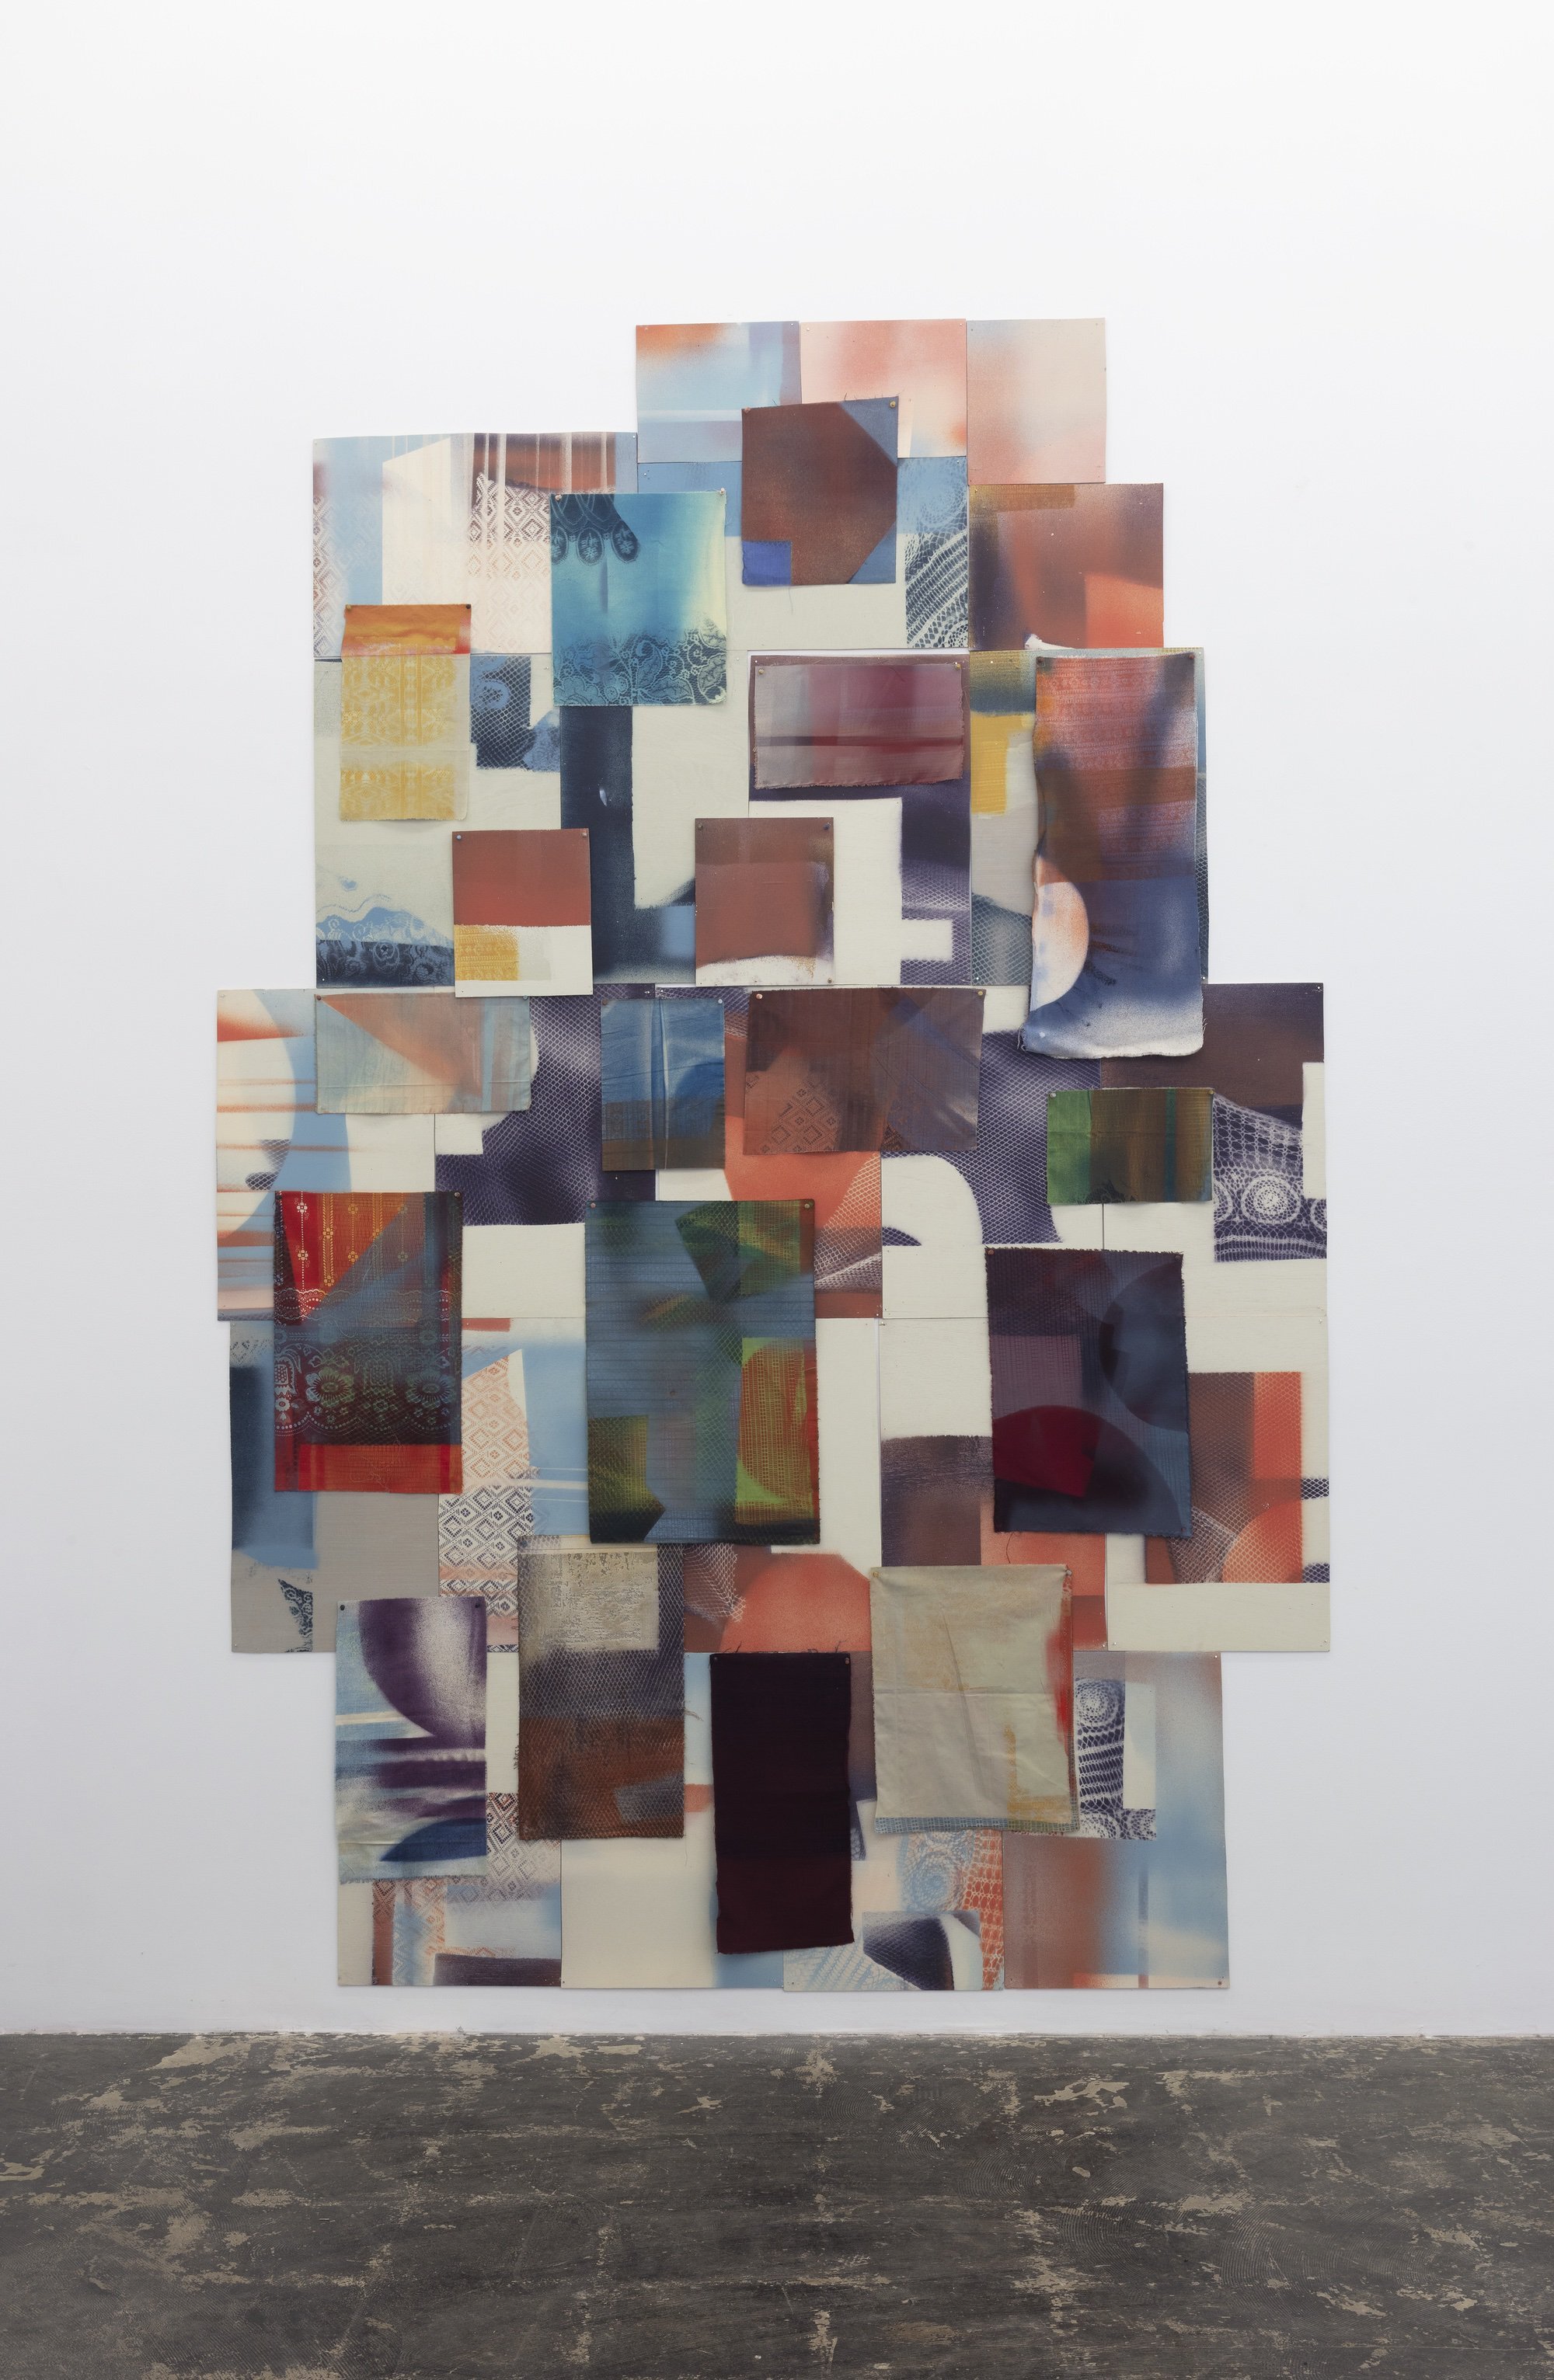  Cybele Lyle  Desert Quilts 1,  2021 Wood panel, acrylic paint, wood, fabric 127 x 78 inches 